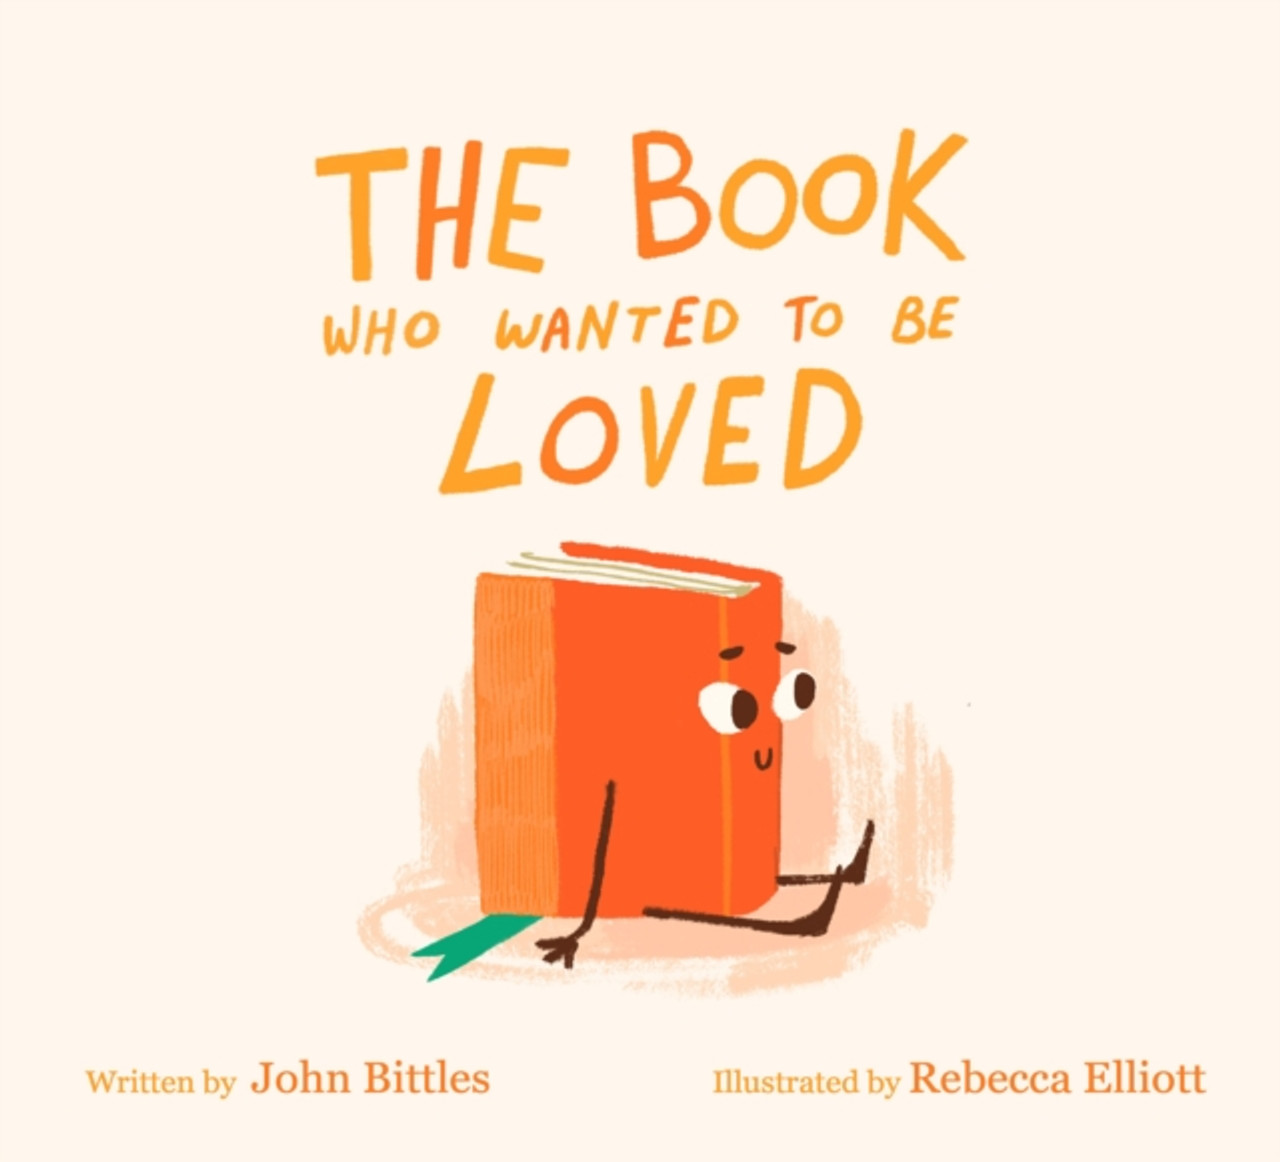 The Book Who Wanted to be Loved by John Bittles and Rebecca Elliott